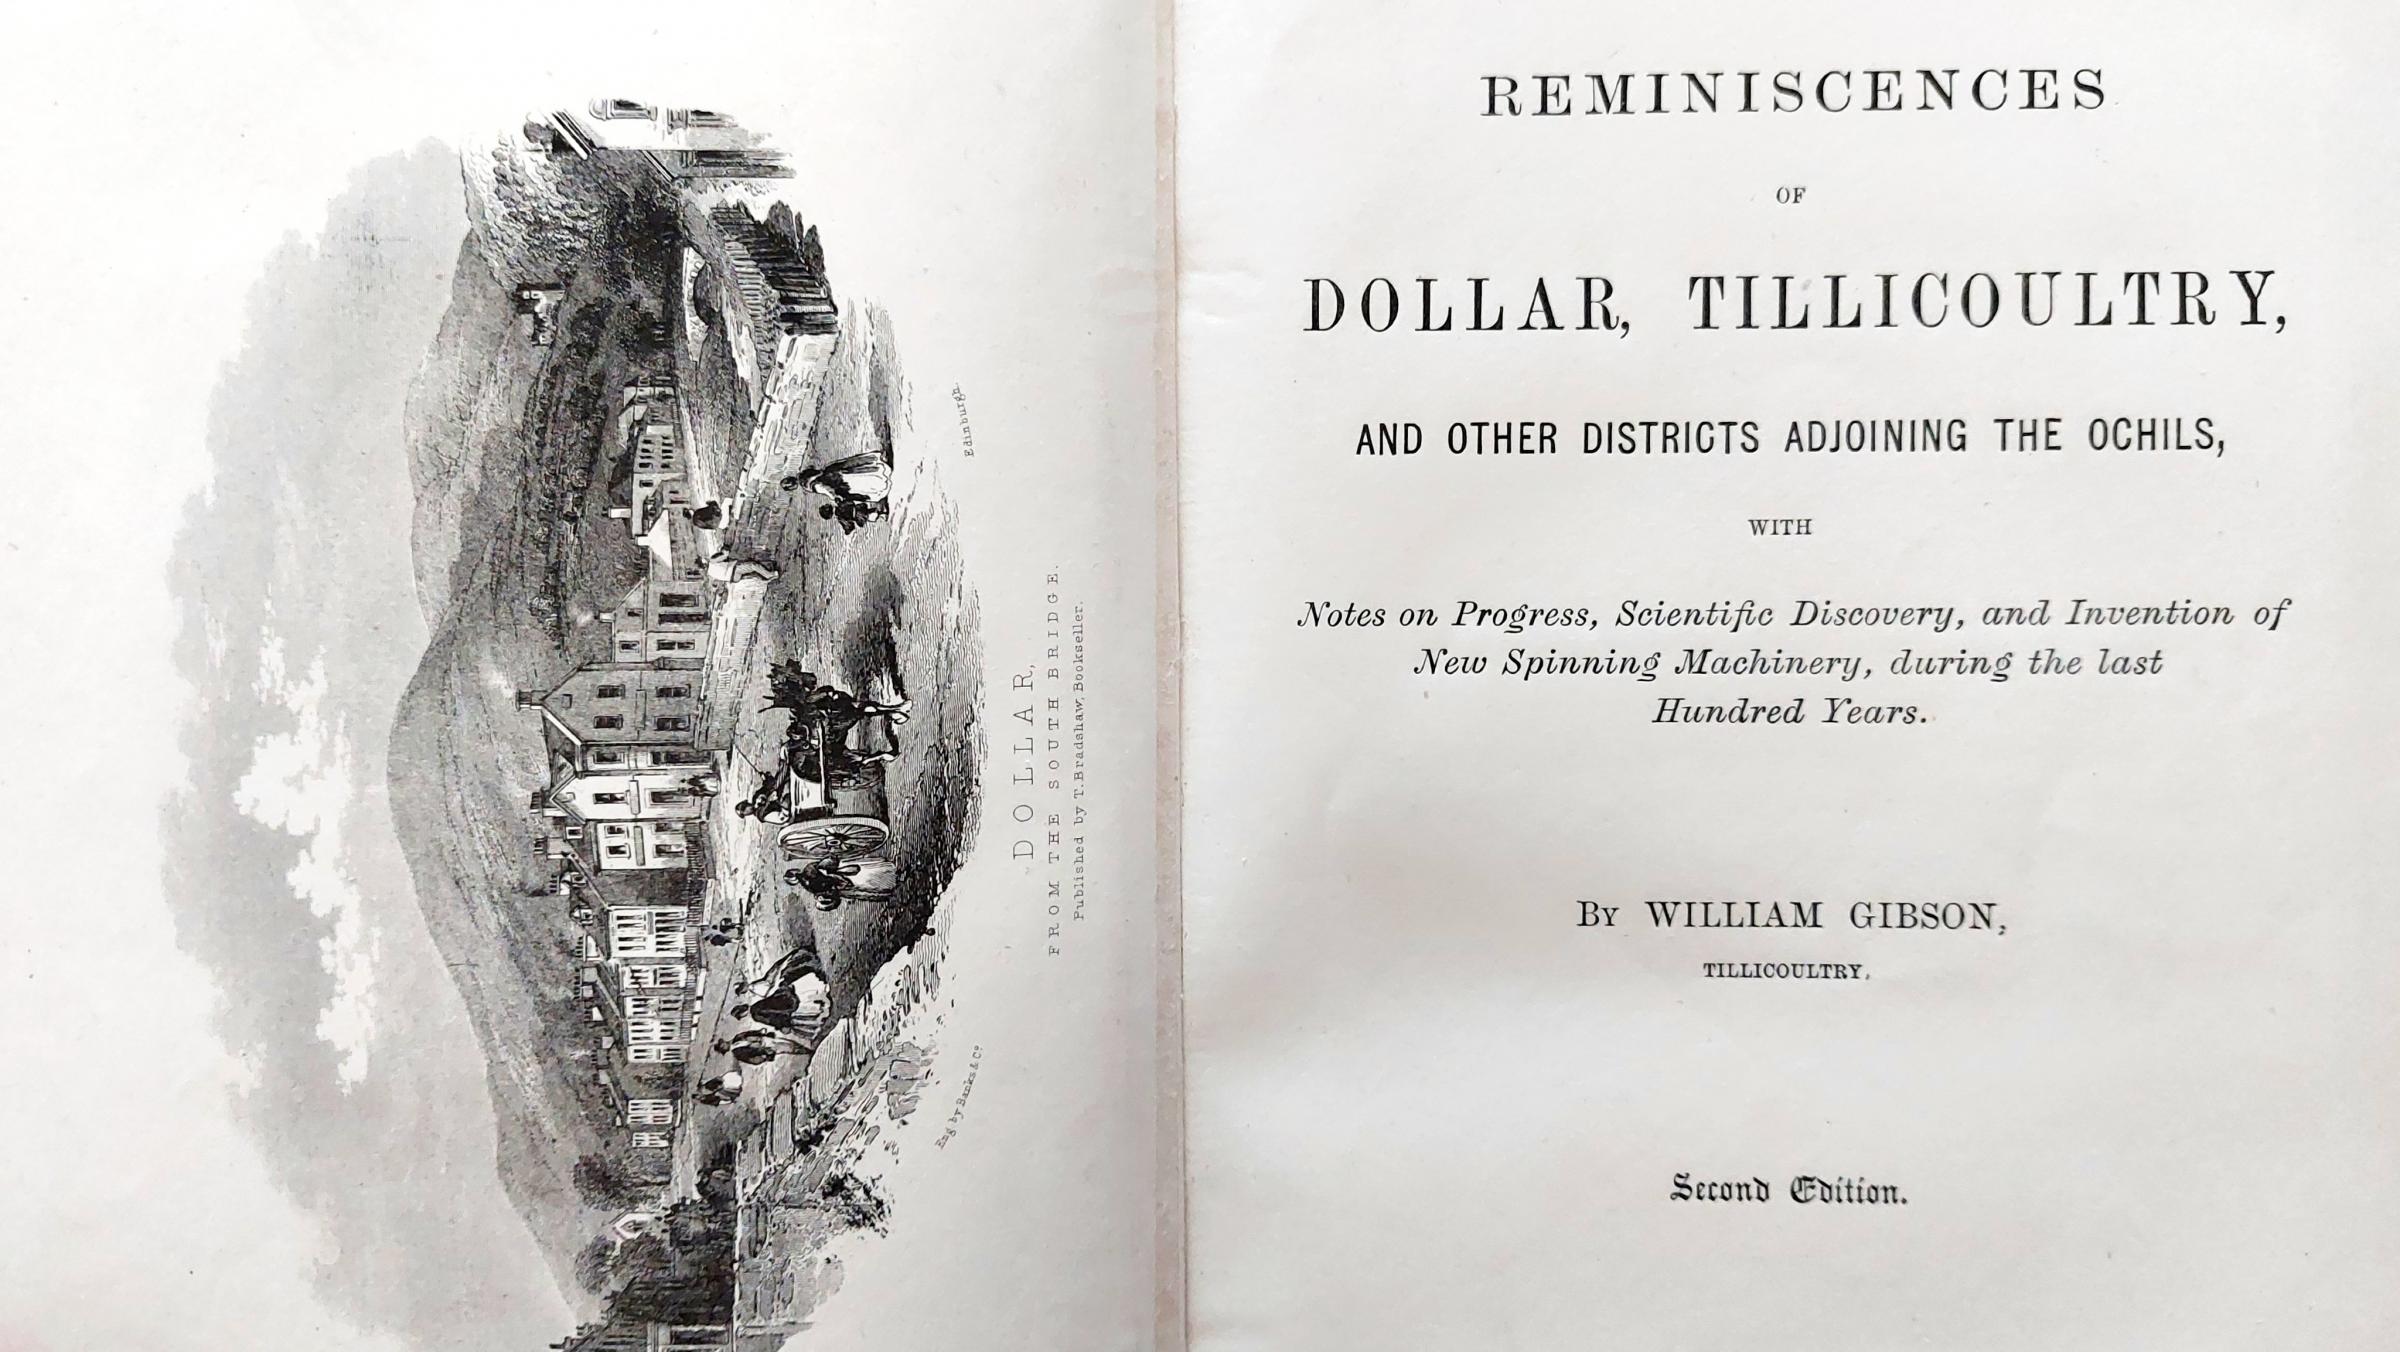 William Gibonss book, ‘Reminiscences of Dollar, Tillicoultry and other districts adjoining the Ochils,’ was published in 1883 